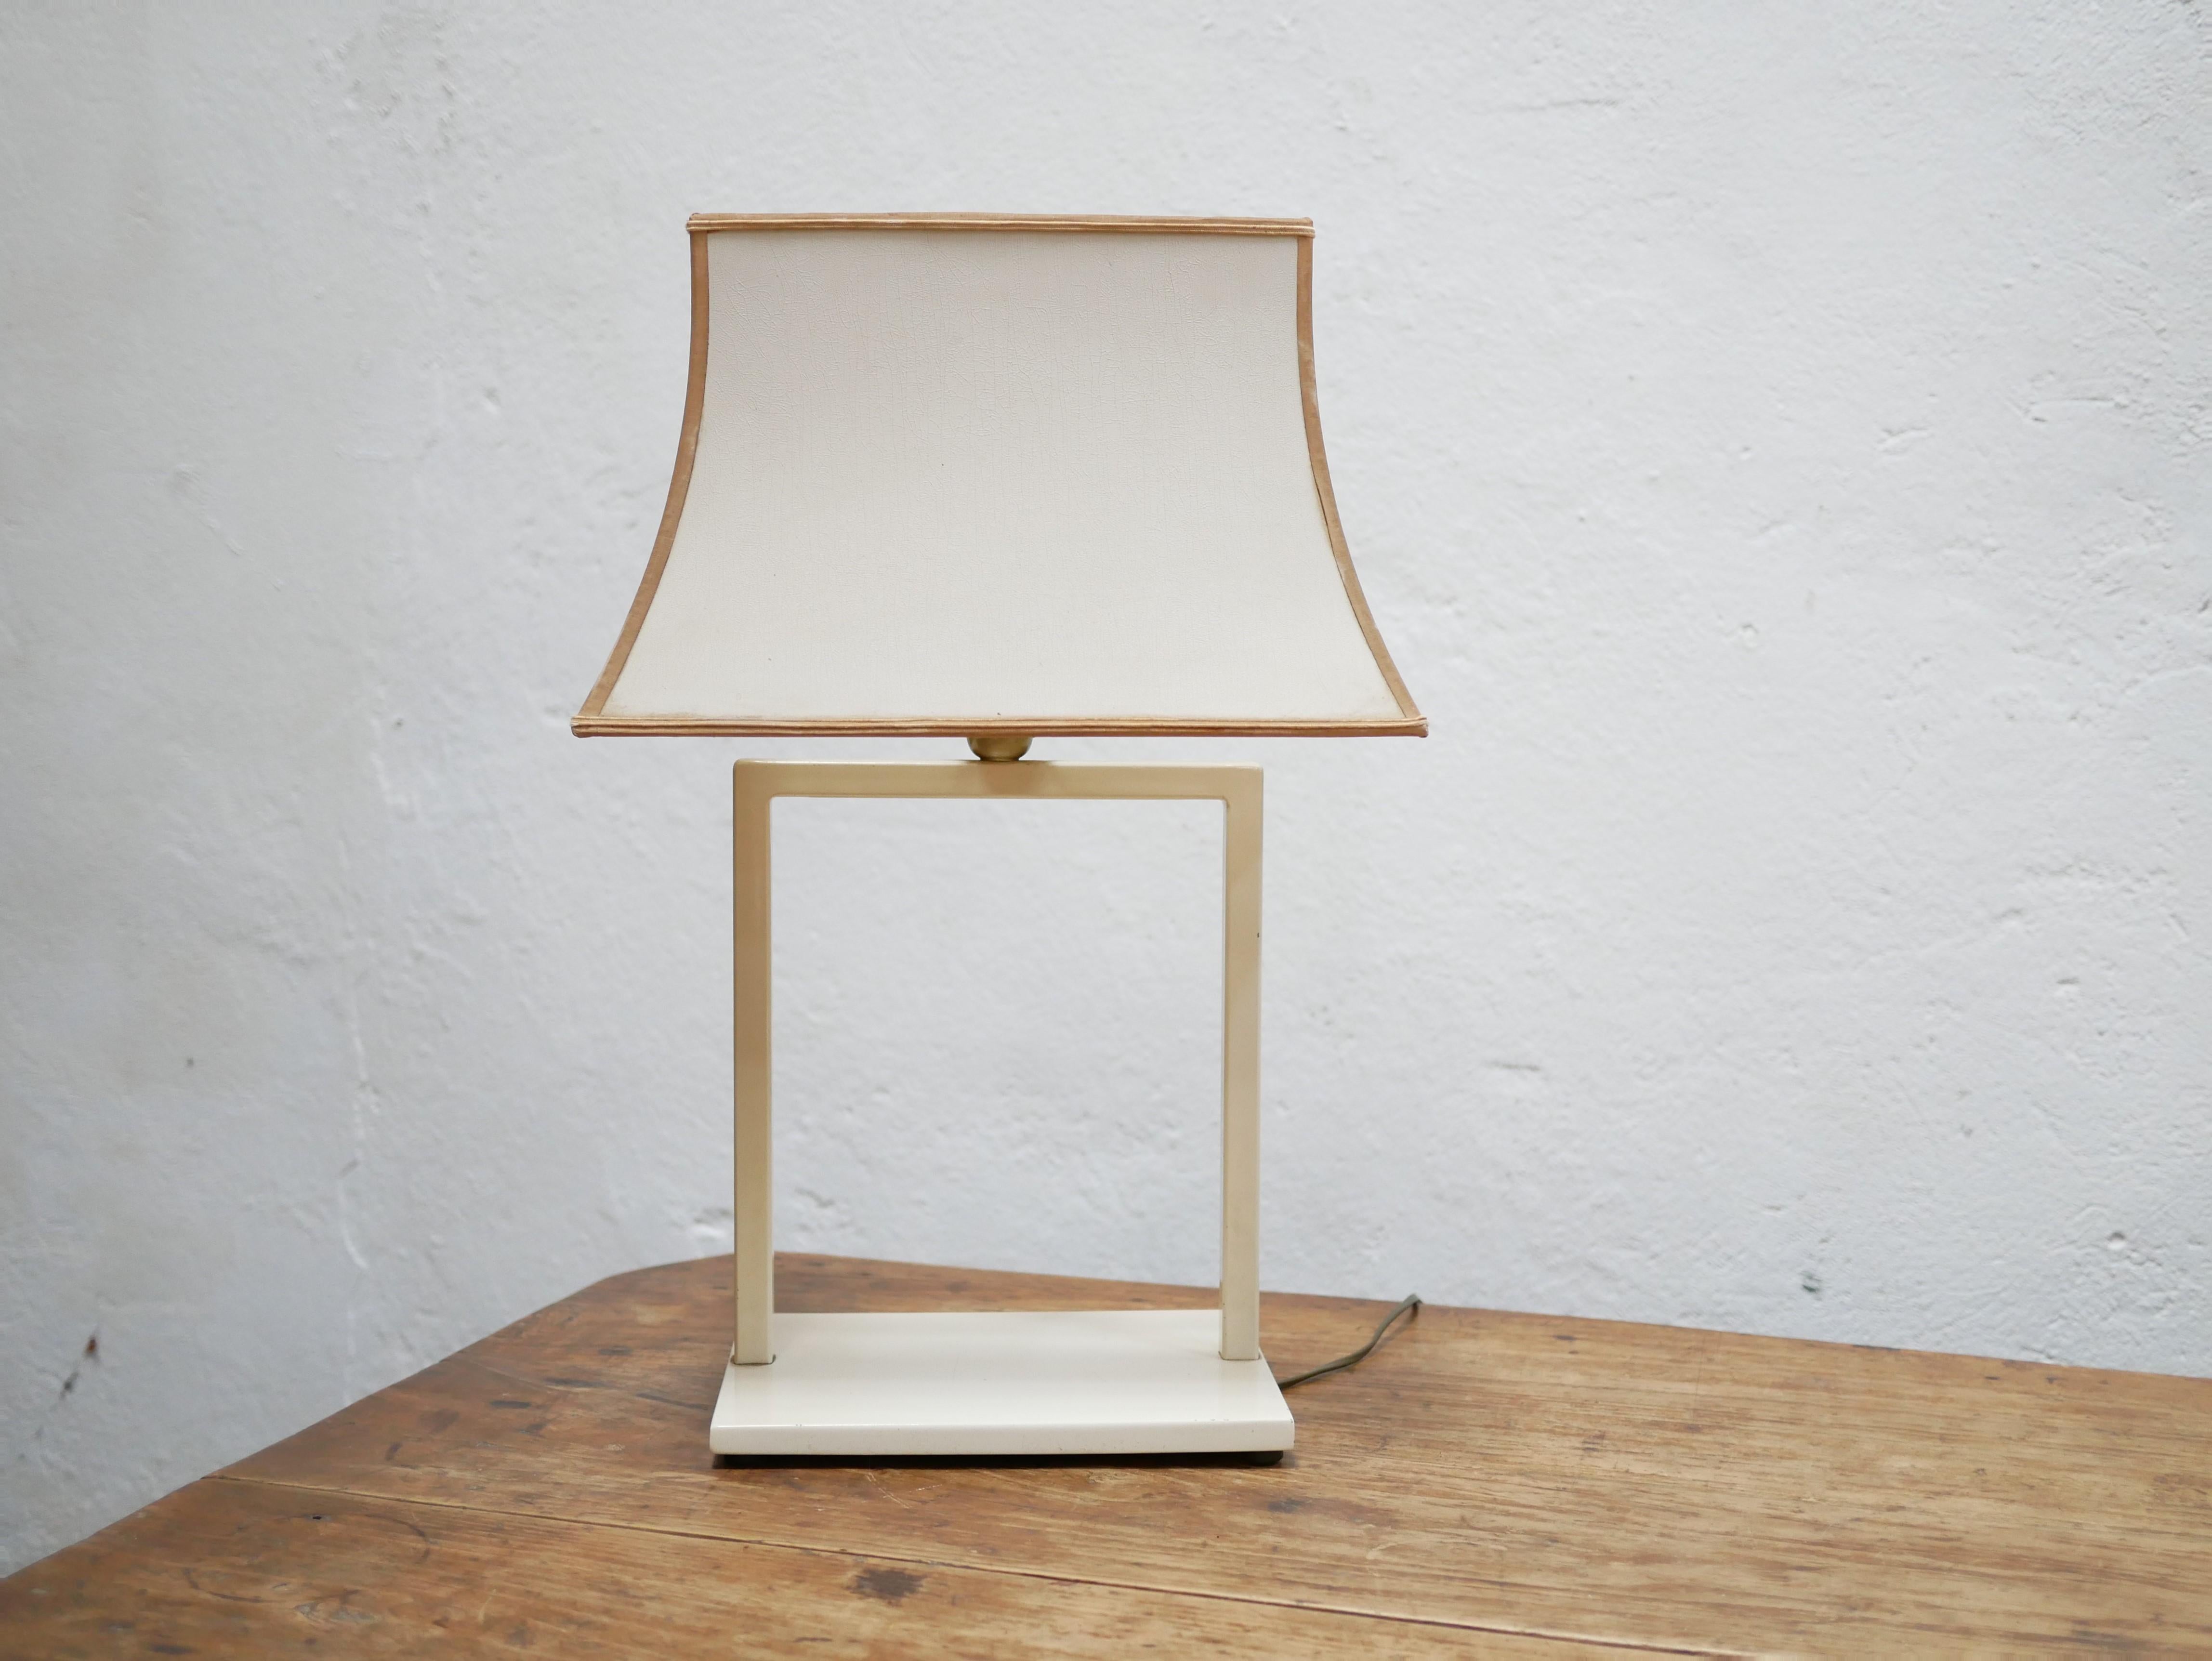 Lamp designed by Phanera editions in the 70s.

Its design does not lack character and elegance. Aesthetic, large and functional, it will be ideal in the living room, the office or in the bedroom for a trendy and modern decoration.

Good